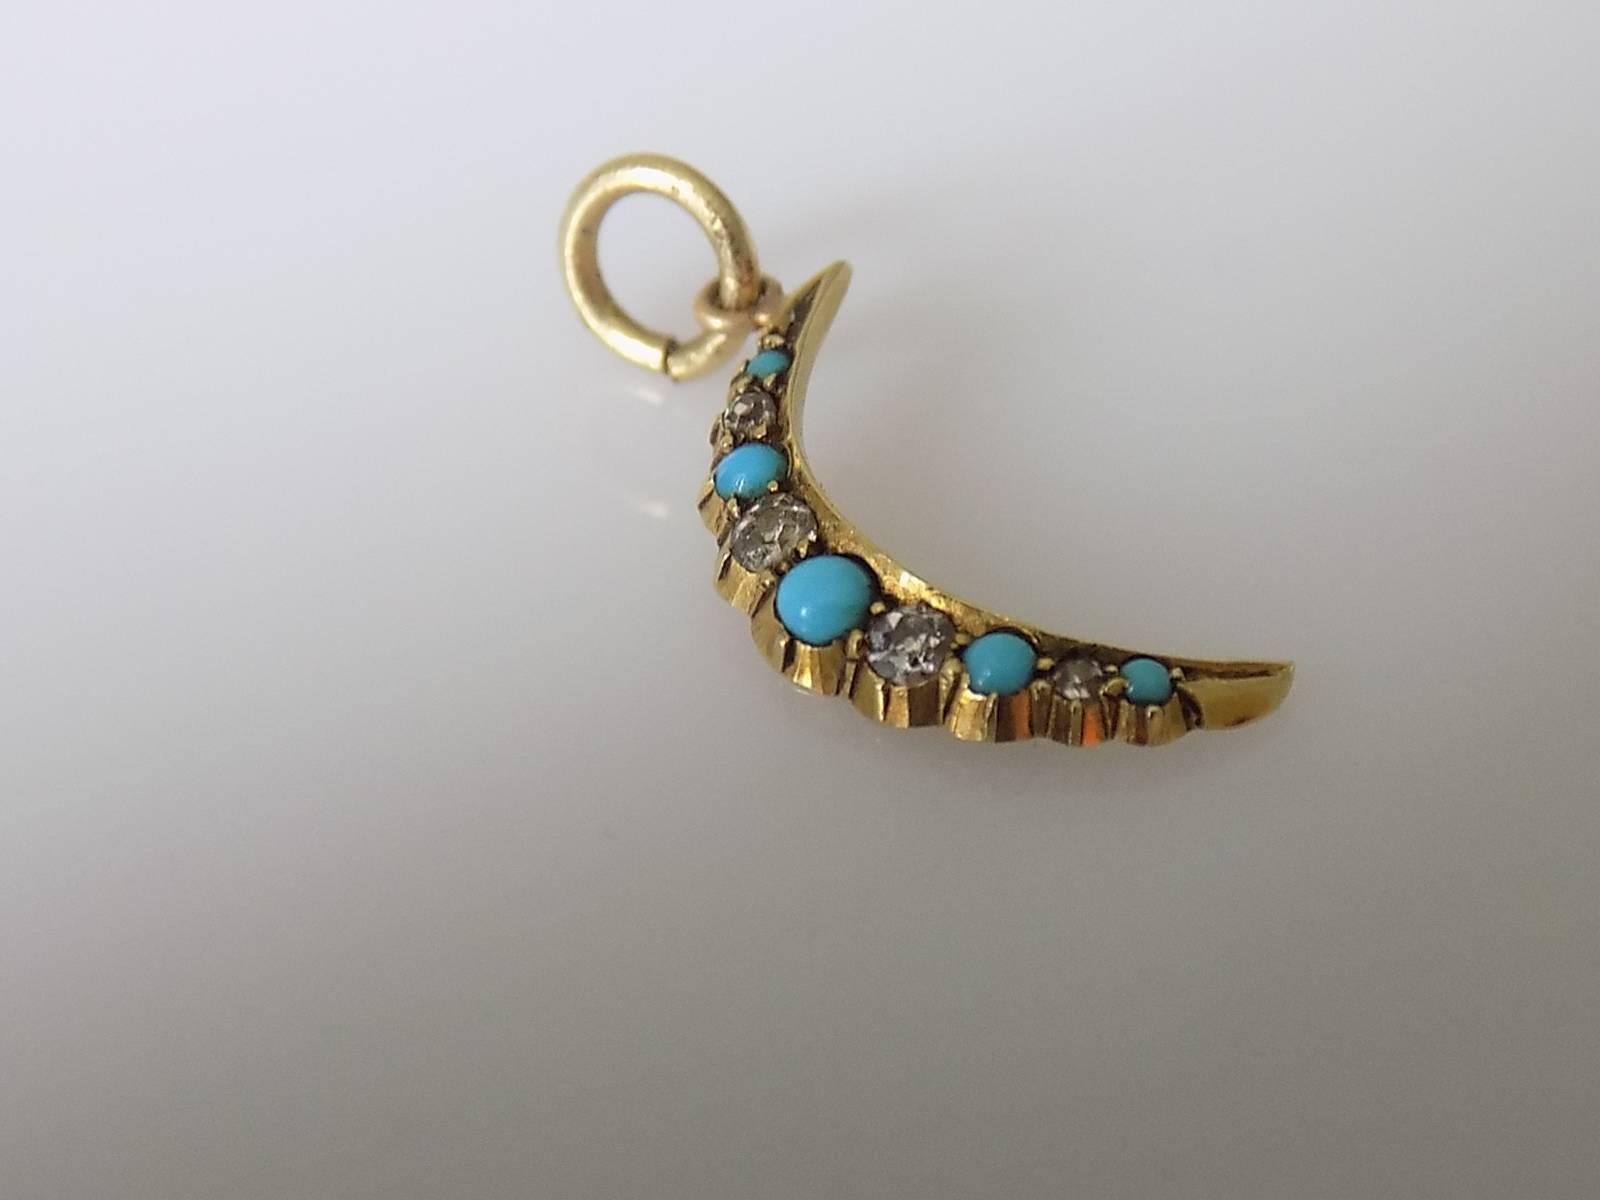 A lovely Victorian c.1860 18 Carat yellow Gold, Old European cut Diamond and Turquoise Crescent pendant / charm. English origin.
Total drop including jump rings 20mm.
Width in widest point 3mm.
Weight 0.5gr.